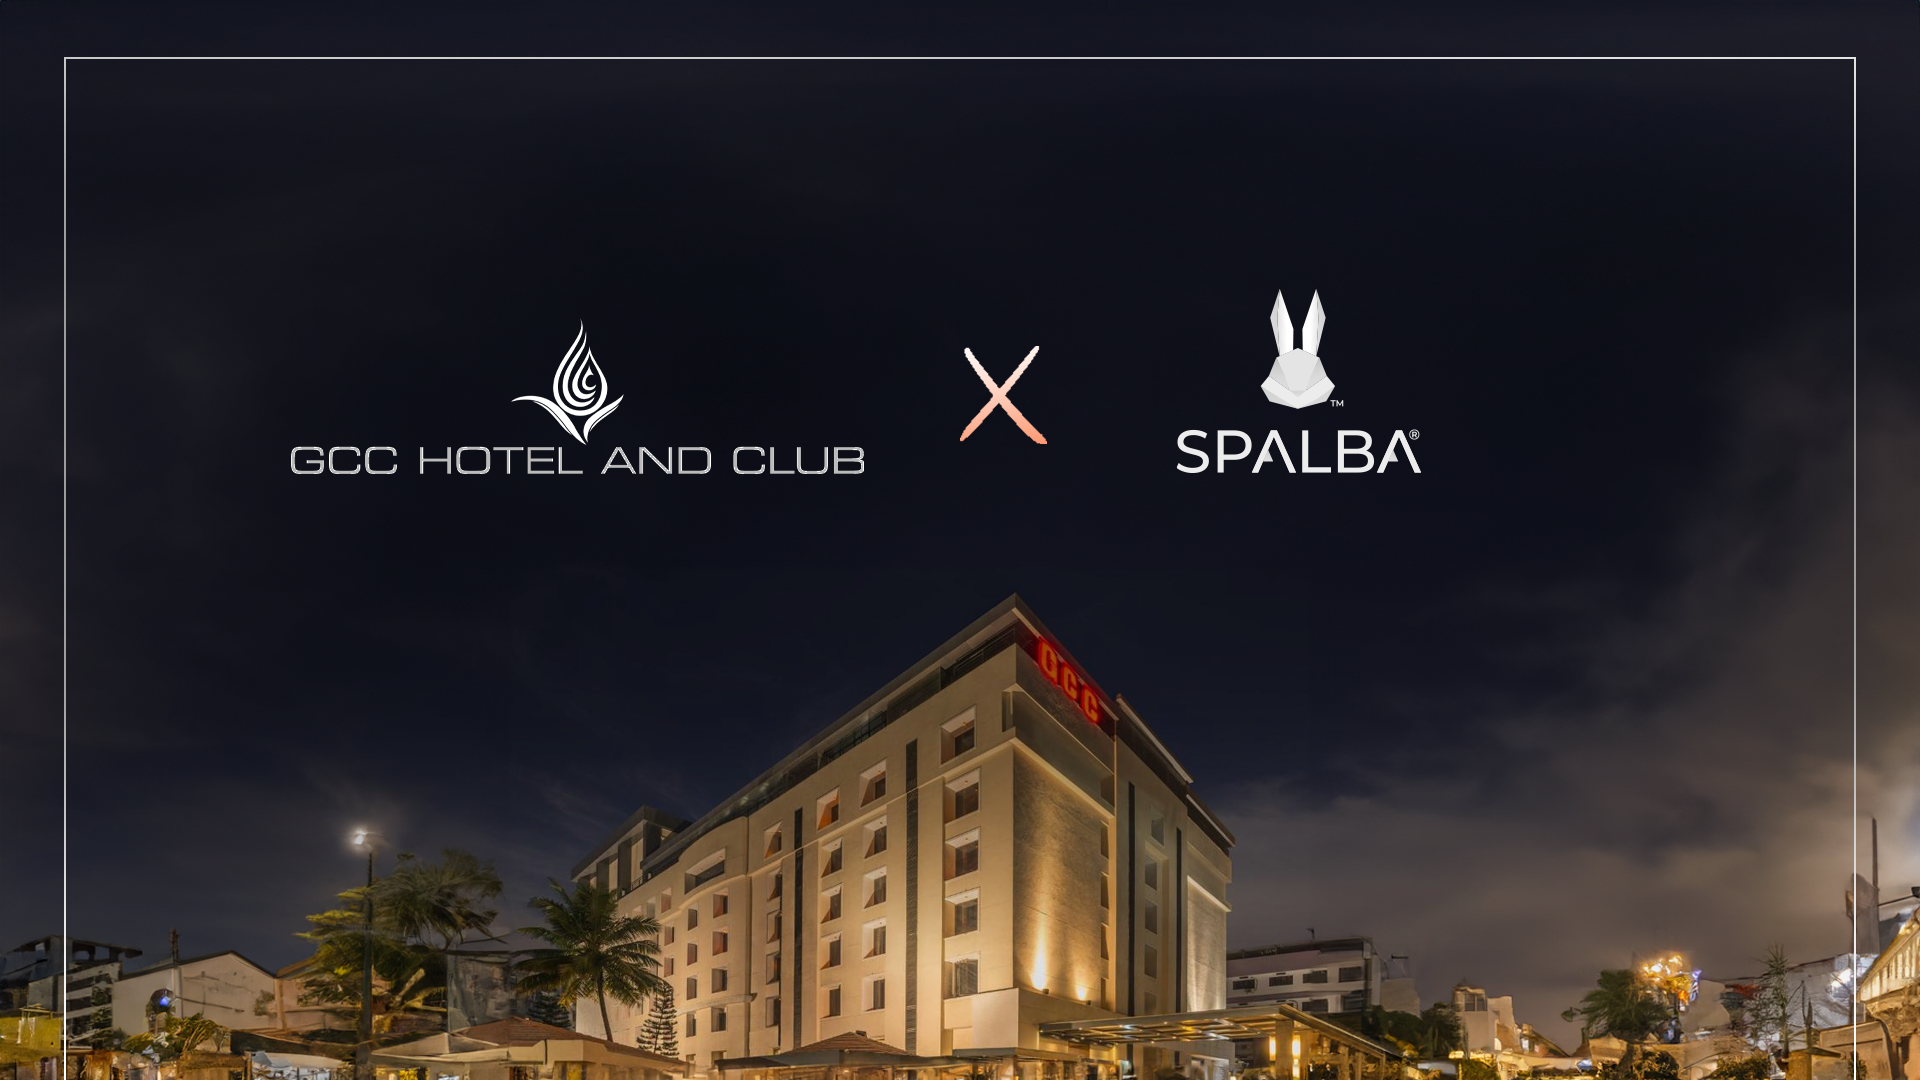 Spalba’s Digital Twin technology boosts sales efficiency at GCC Hotel and Club